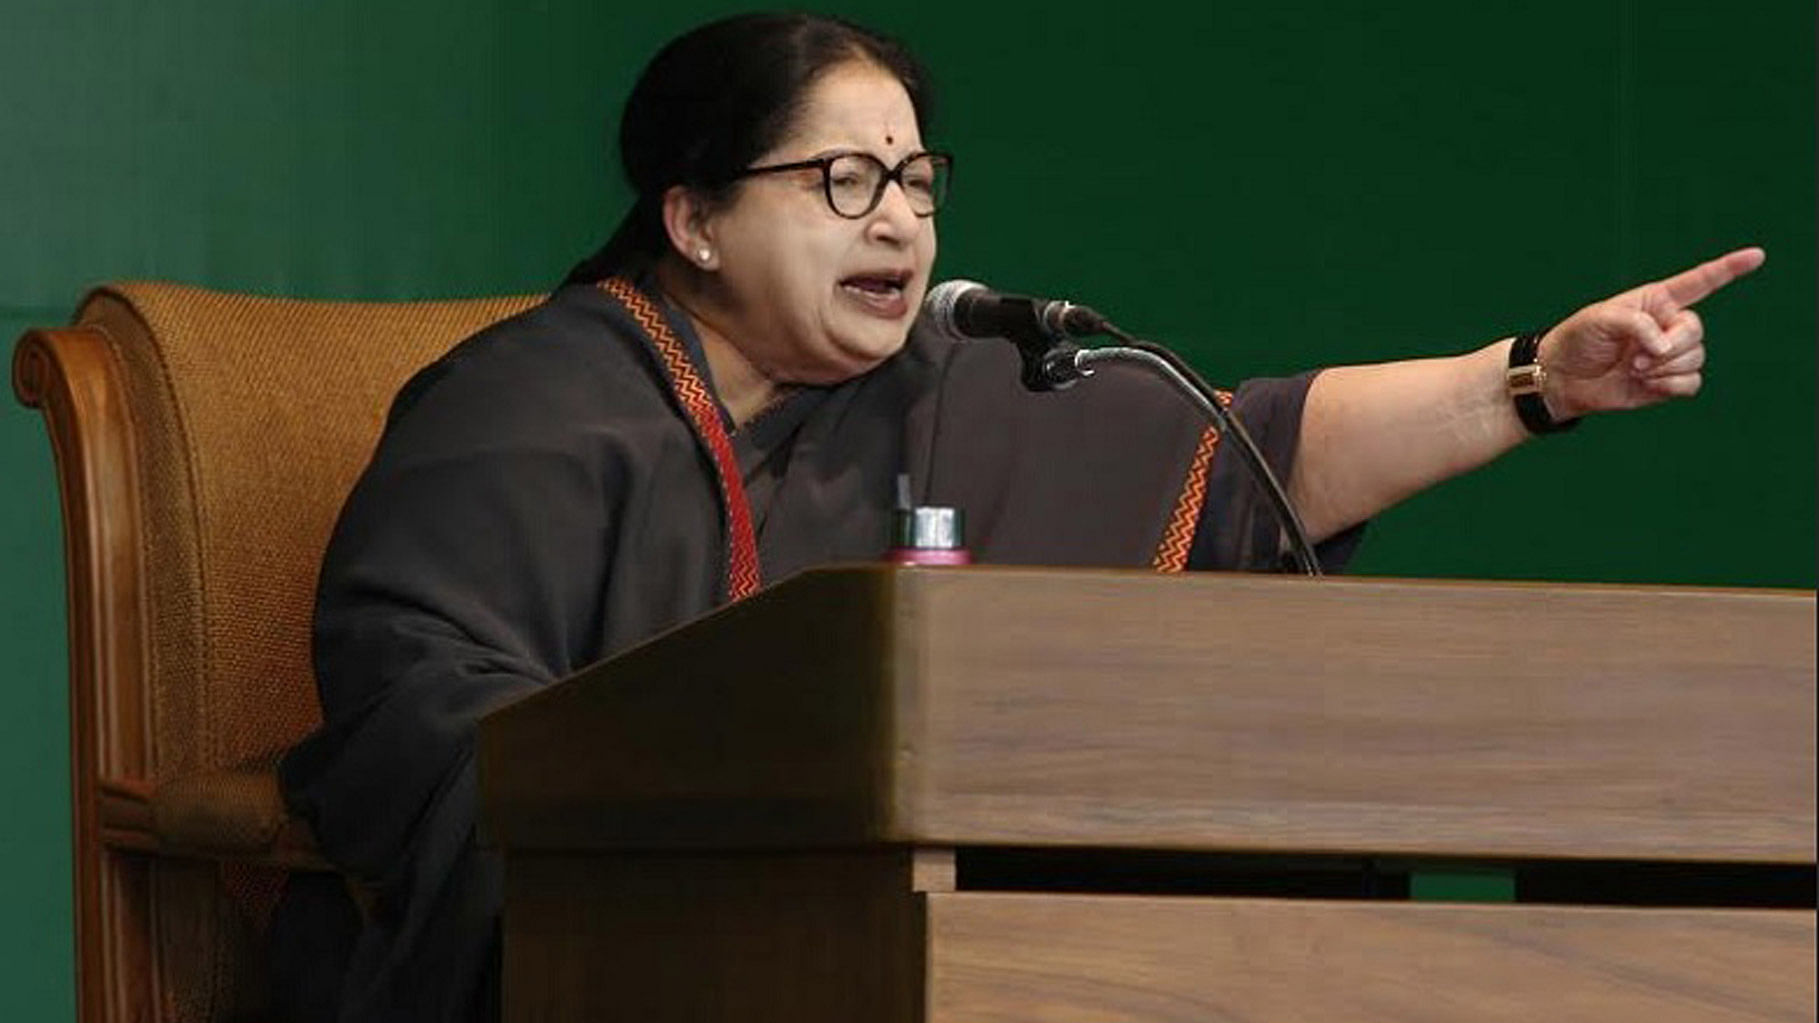 This is the first time since 1984 that an incumbent government has been re-elected in the state of Tamil Nadu. (Photo Courtesy: <i>The News Minute</i>)